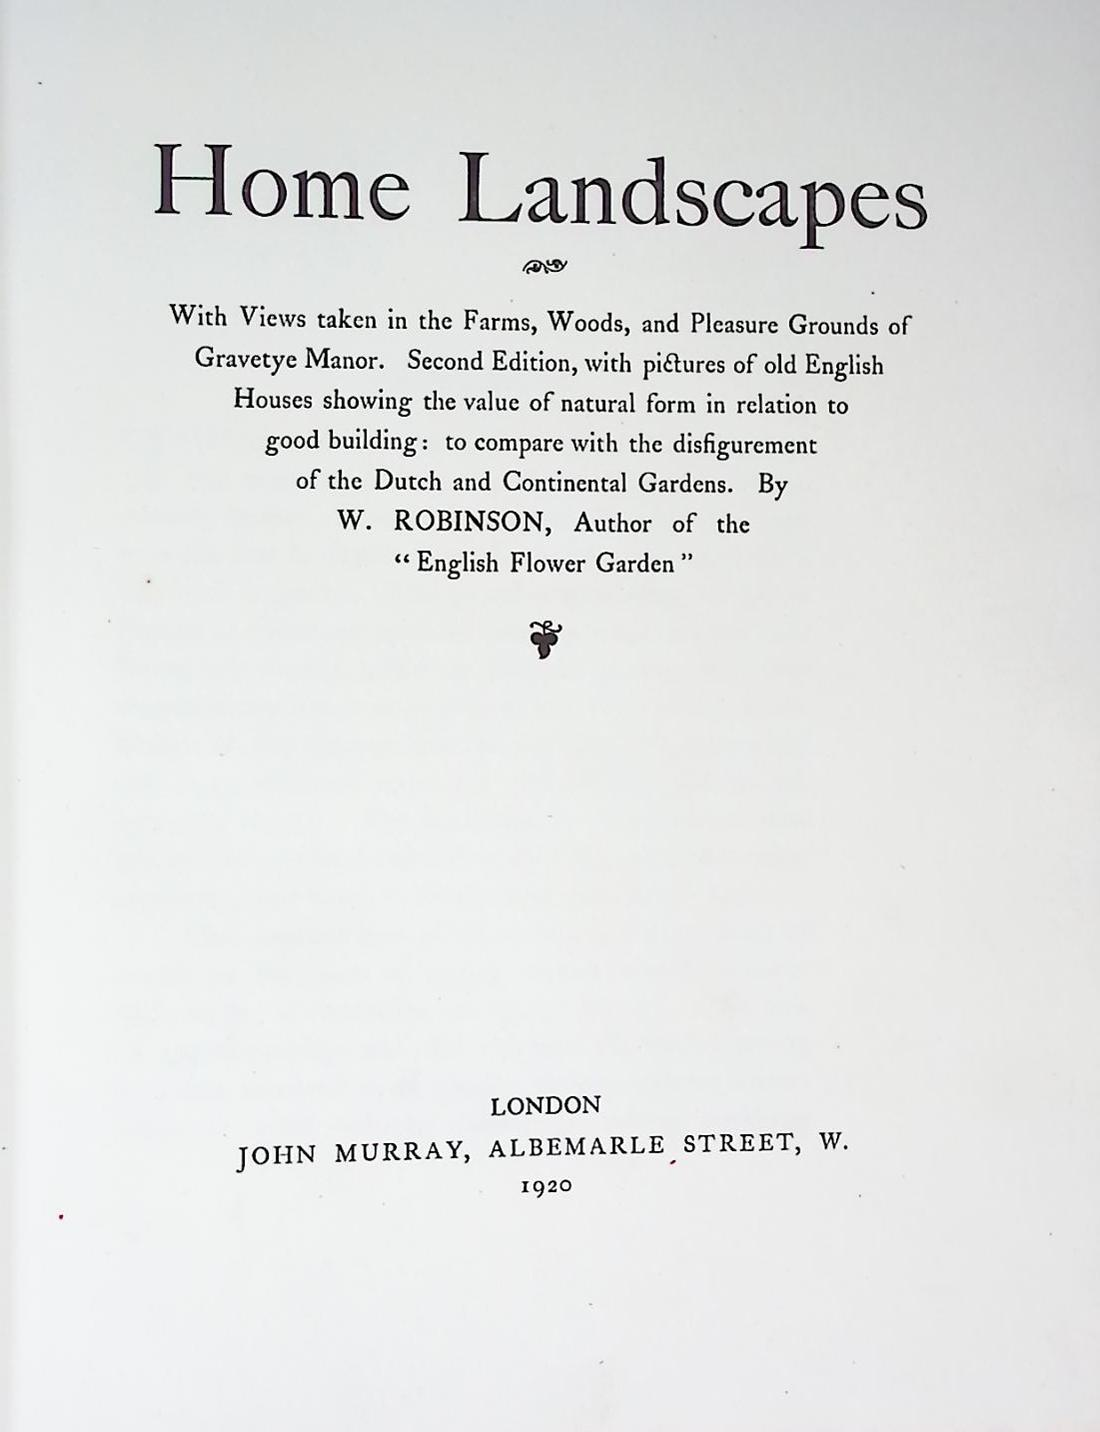 Home Landscapes. With Views taken in the Farms, Woods, and Pleasure Grounds of Gravetye Manor. With Supplement.